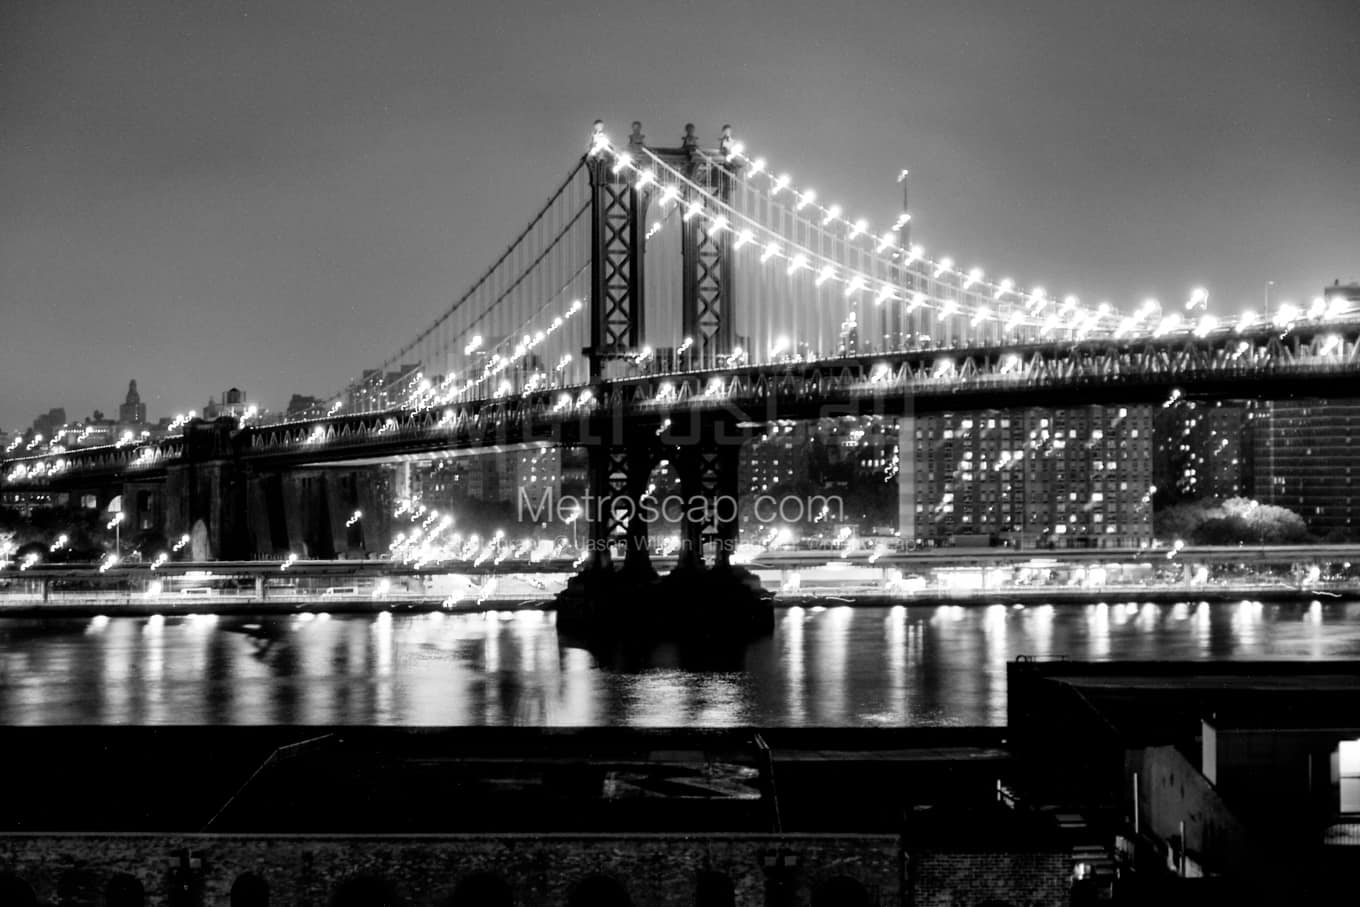 Black & White New York City Architecture Pictures